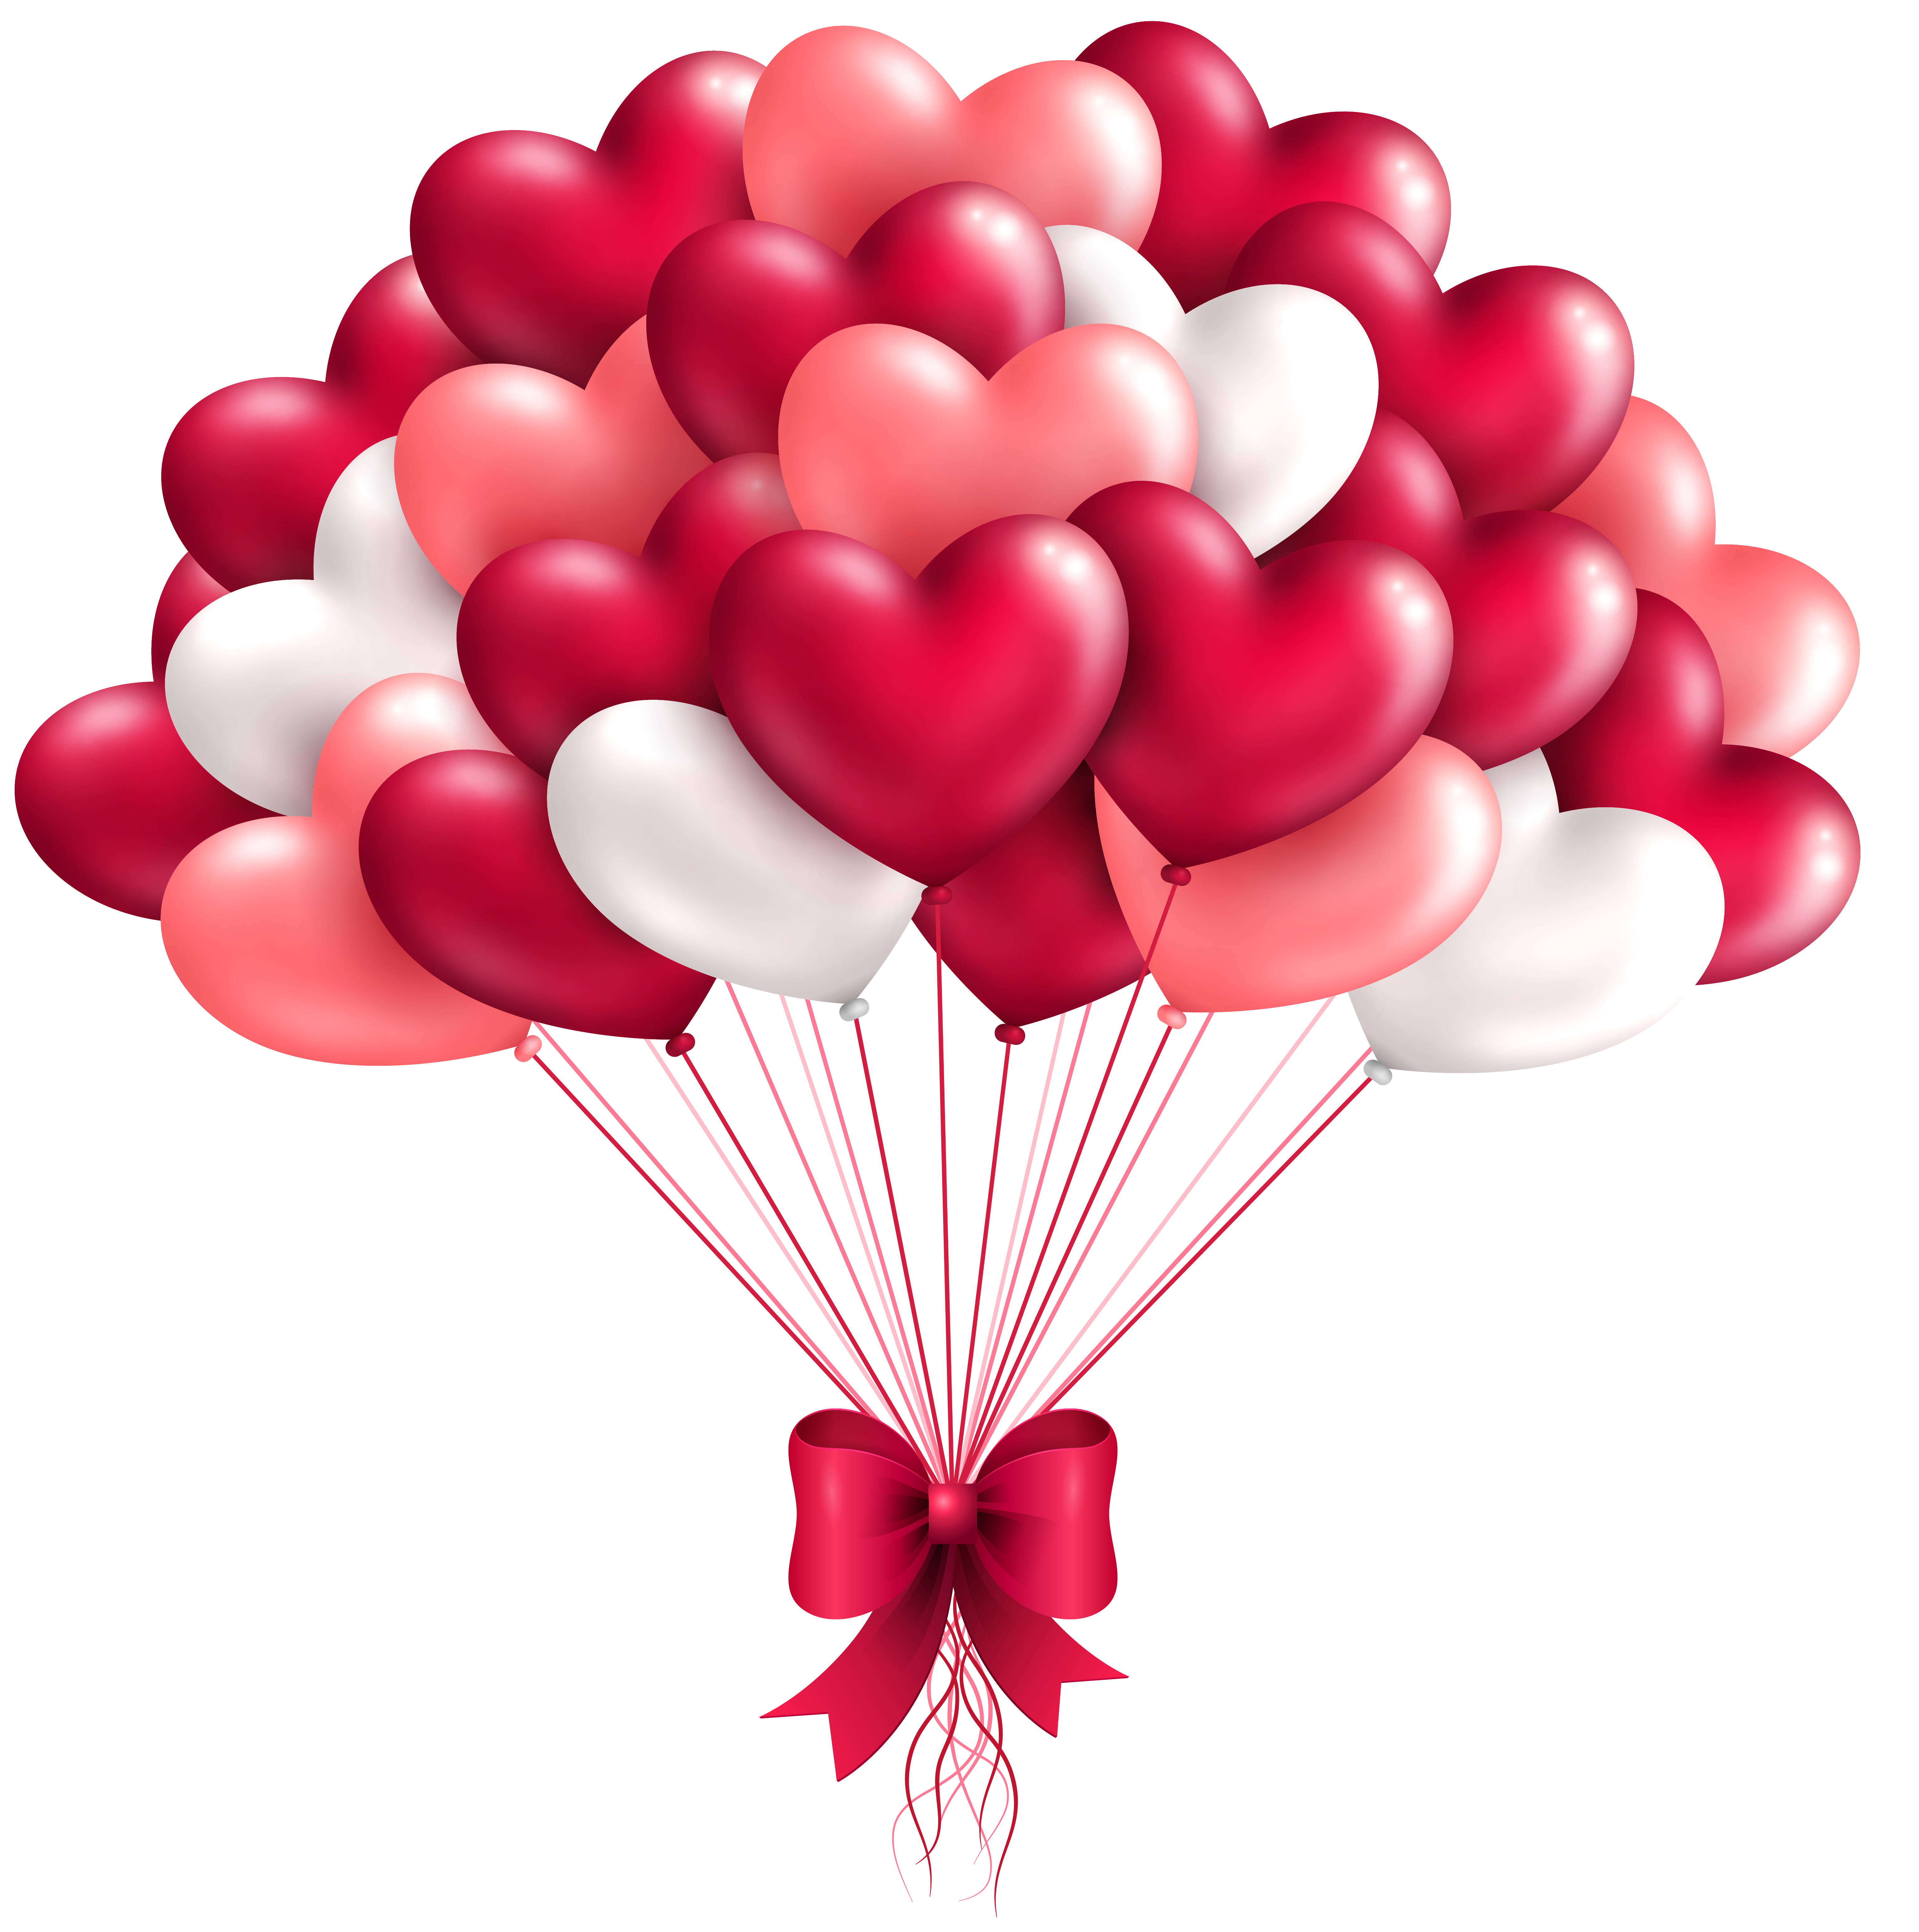 Beautiful Heart Balloons PNG Clipart Image.